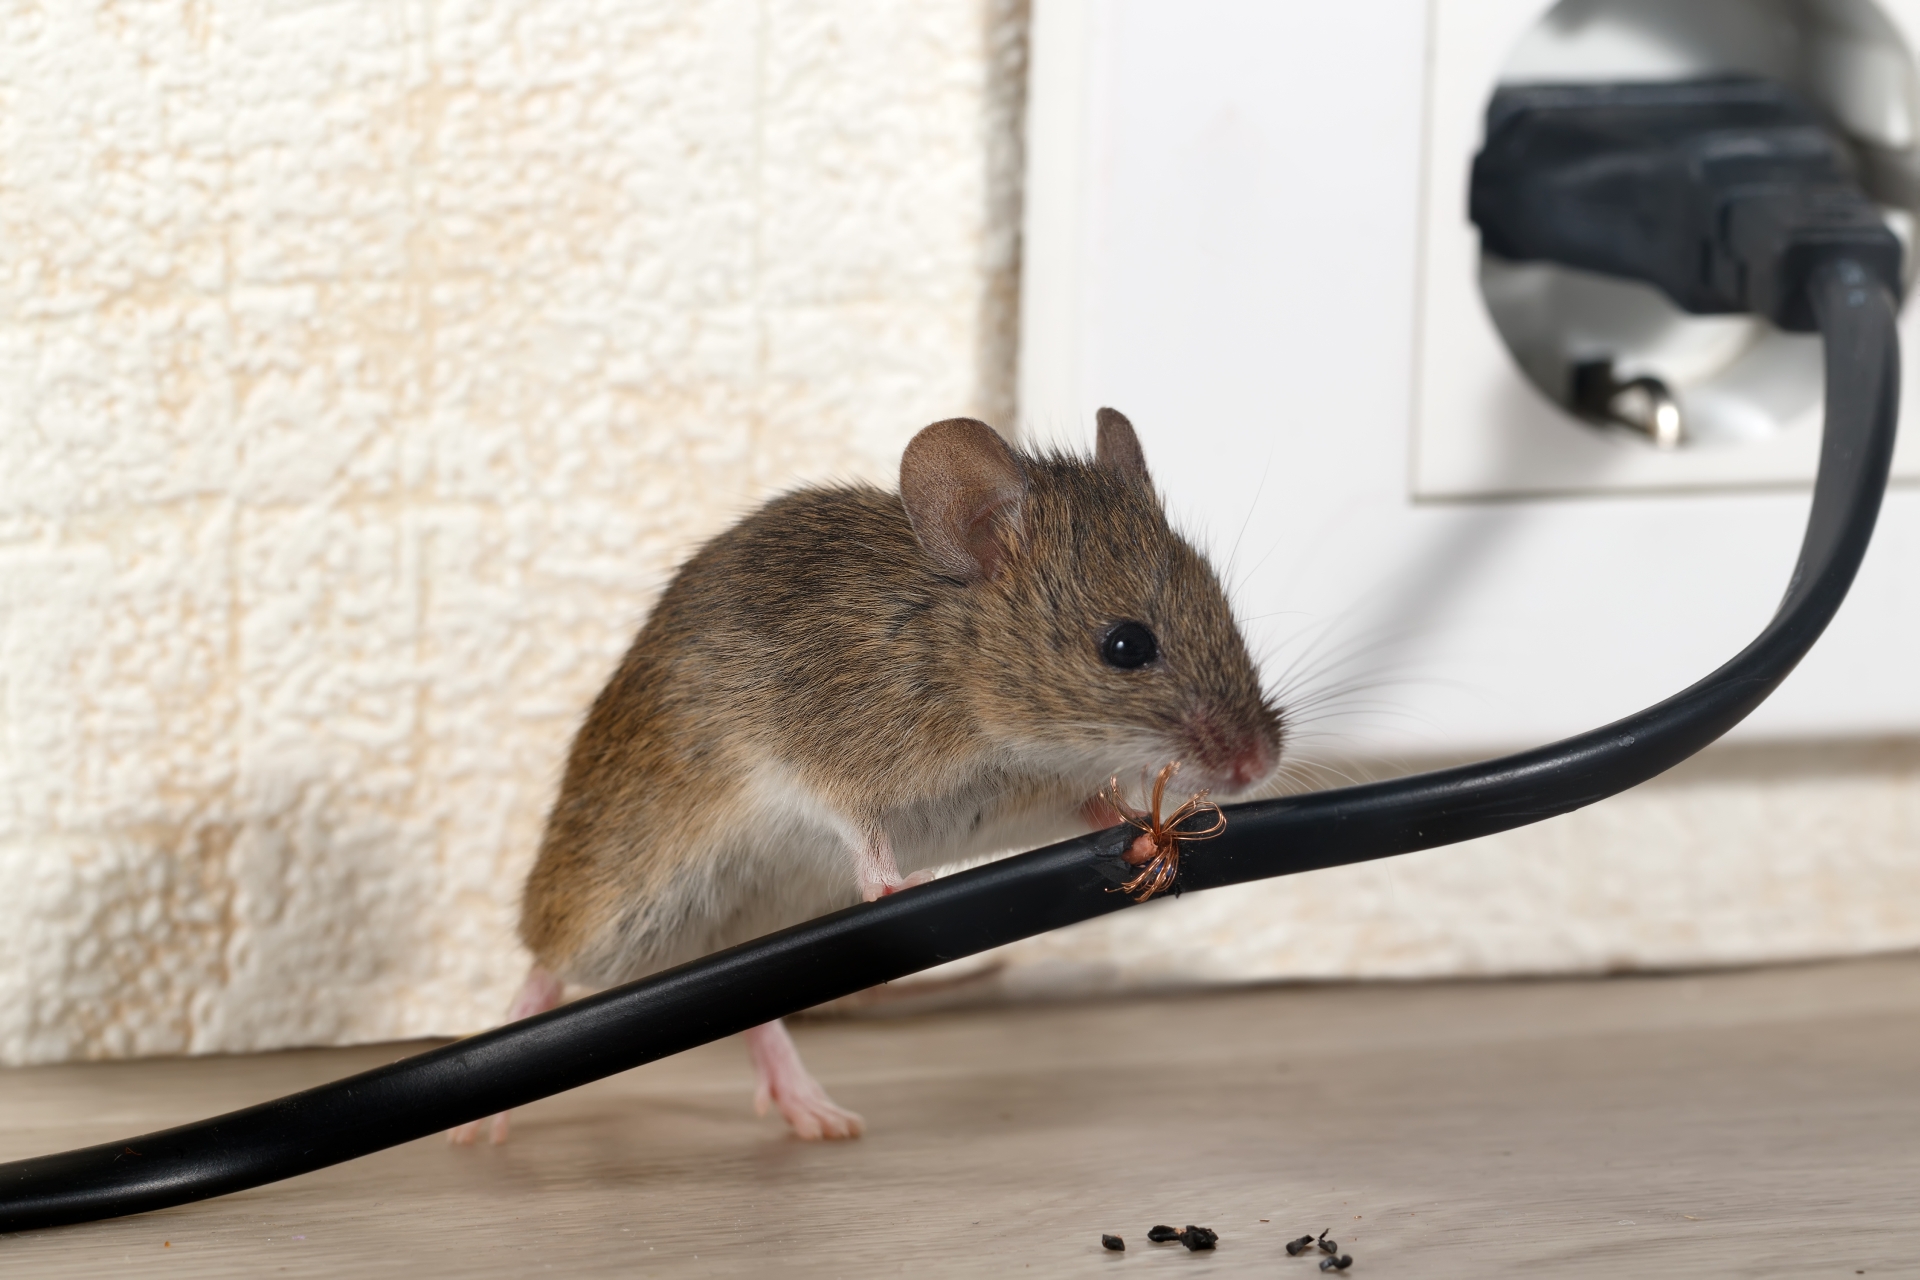 Mice Infestation, Pest Control in Kensal Green, NW10. Call Now 020 8166 9746